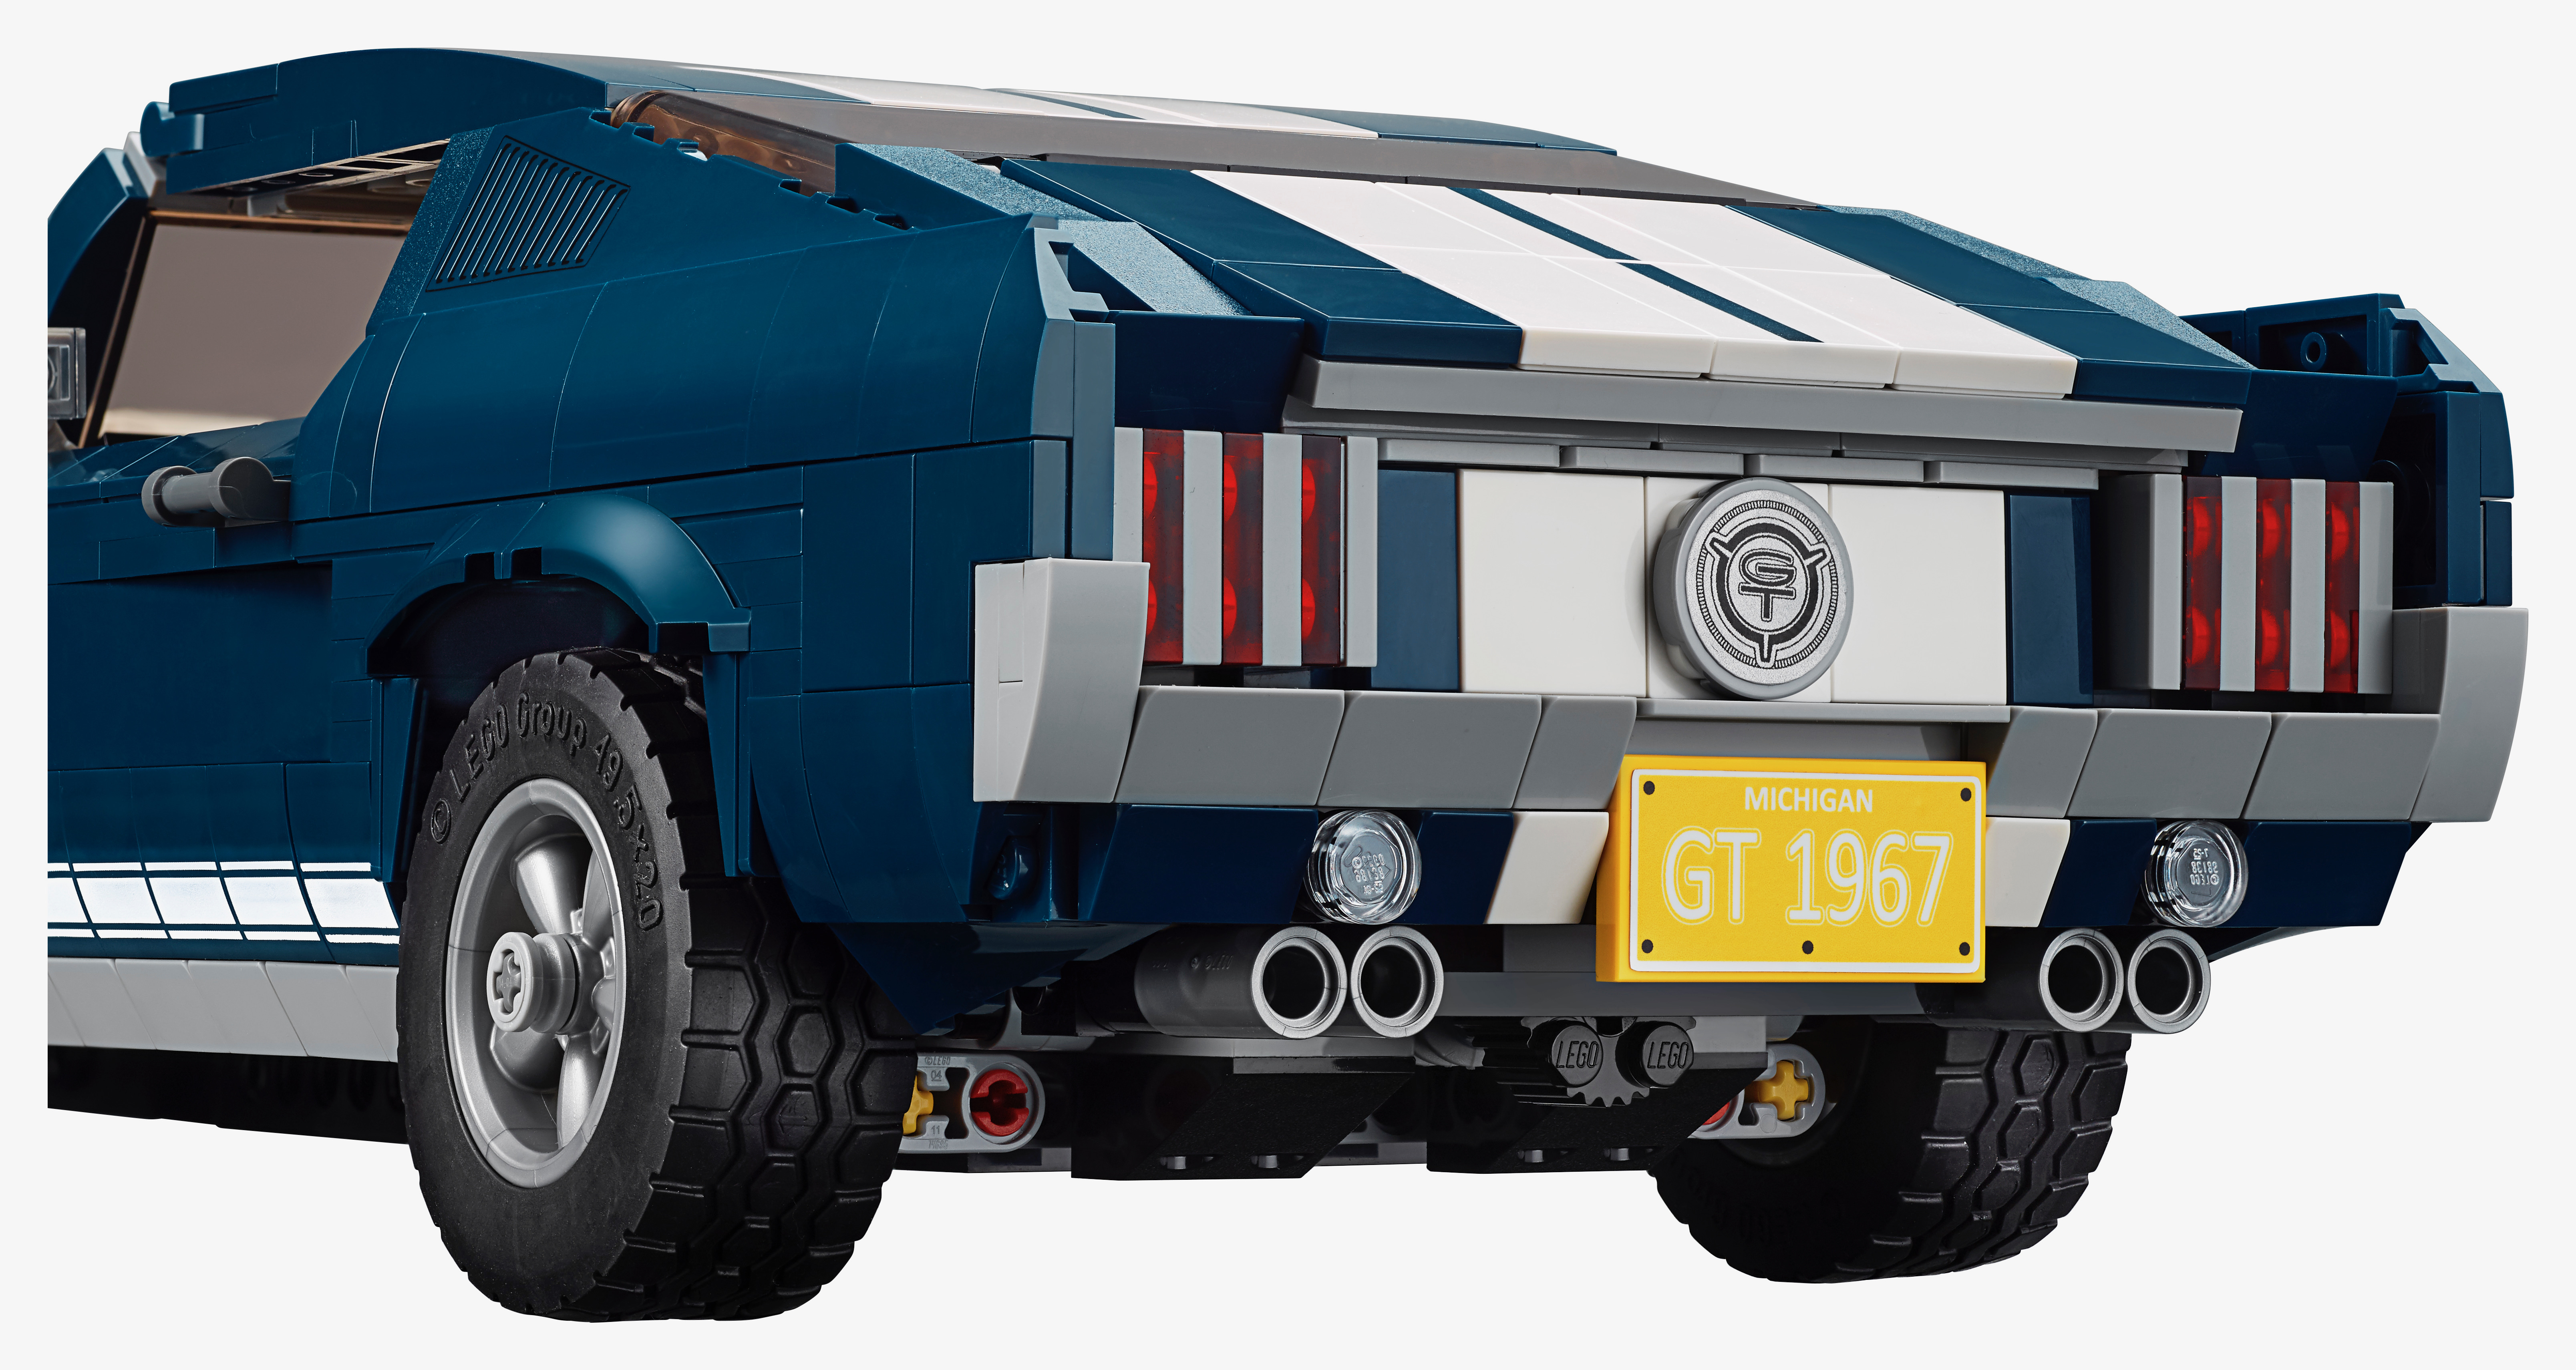 Lego Mustang, Assembly required: Lego rolling out 1967 Ford Mustang, ClassicCars.com Journal